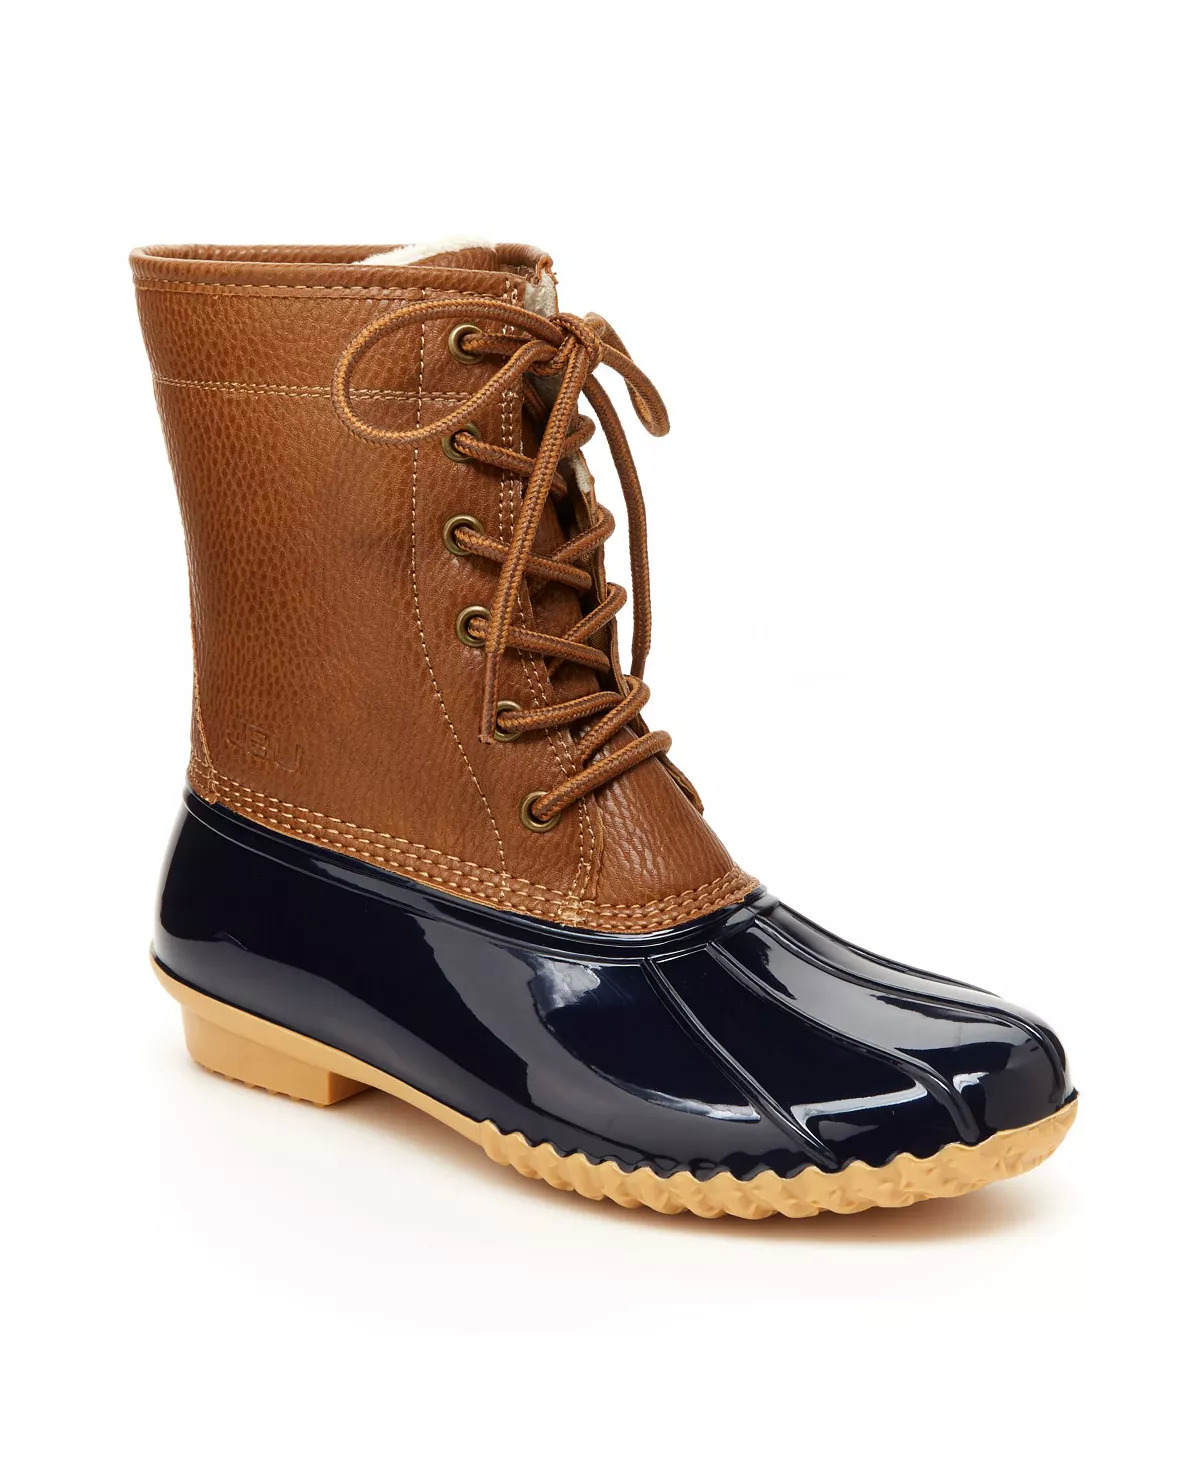 JBU Women's Maplewood Casual Duck Boot $21, JBU Men's Maine Duck Boot $25 & More + Free Store Pickup at Macy's or F/S on Orders $25+